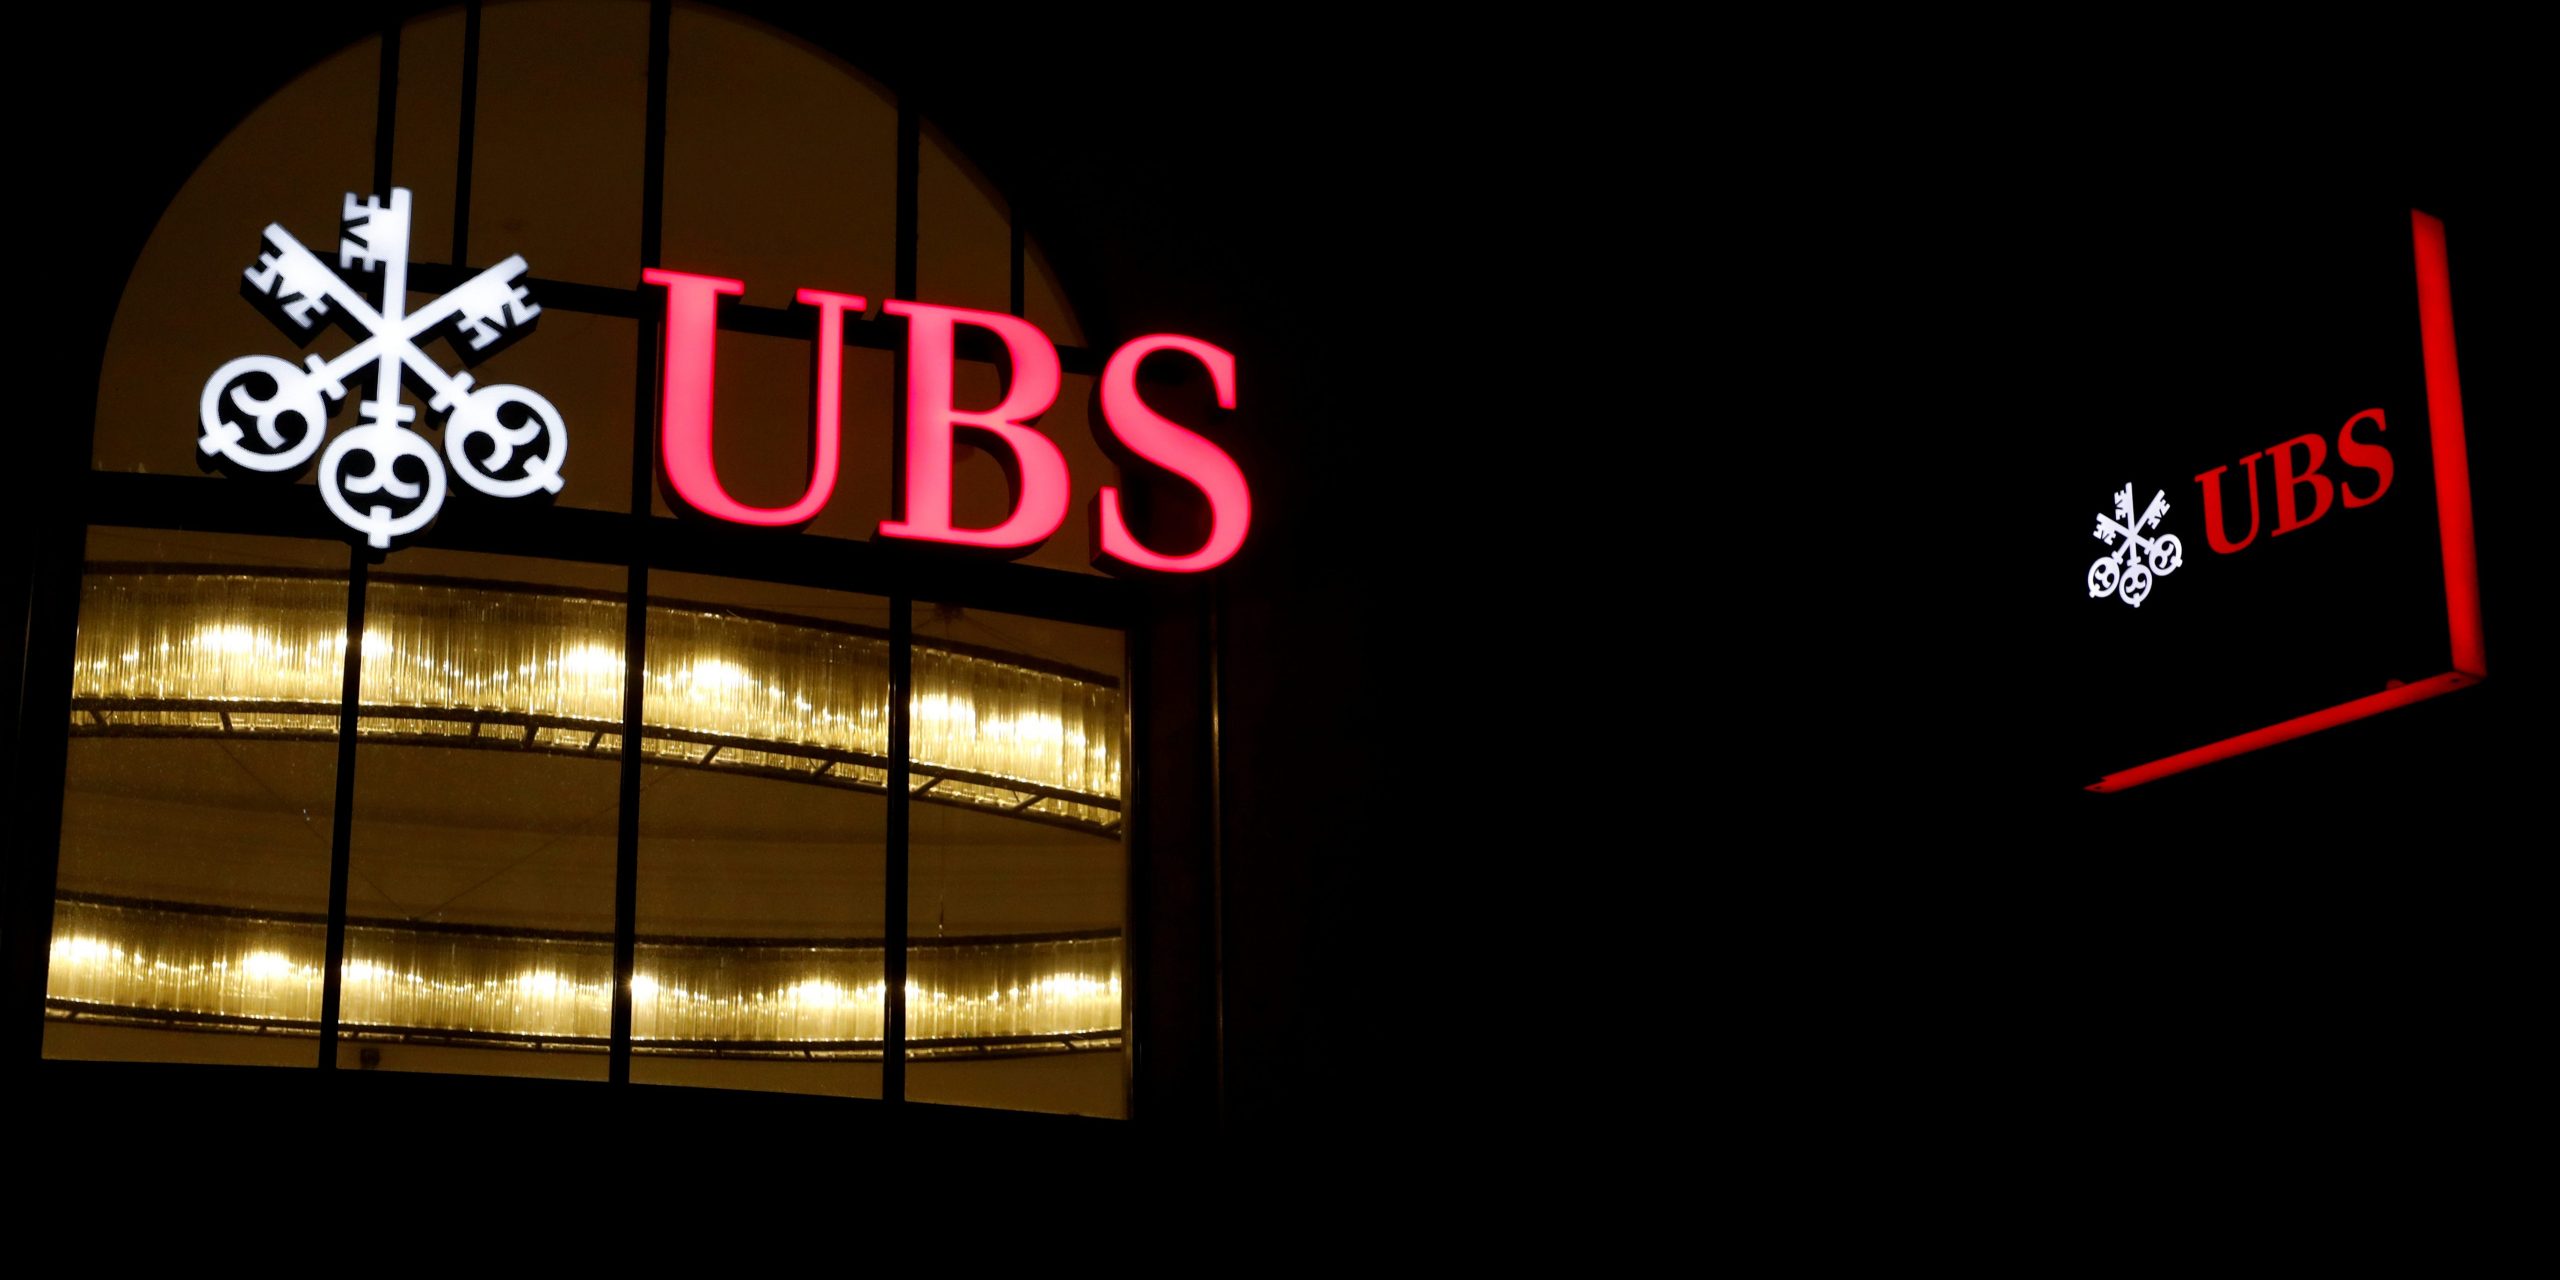 Top Swiss bank UBS smashes expectations with 99% rise in third-quarter net profit as trading and wealth management surge | Markets – Business Insider